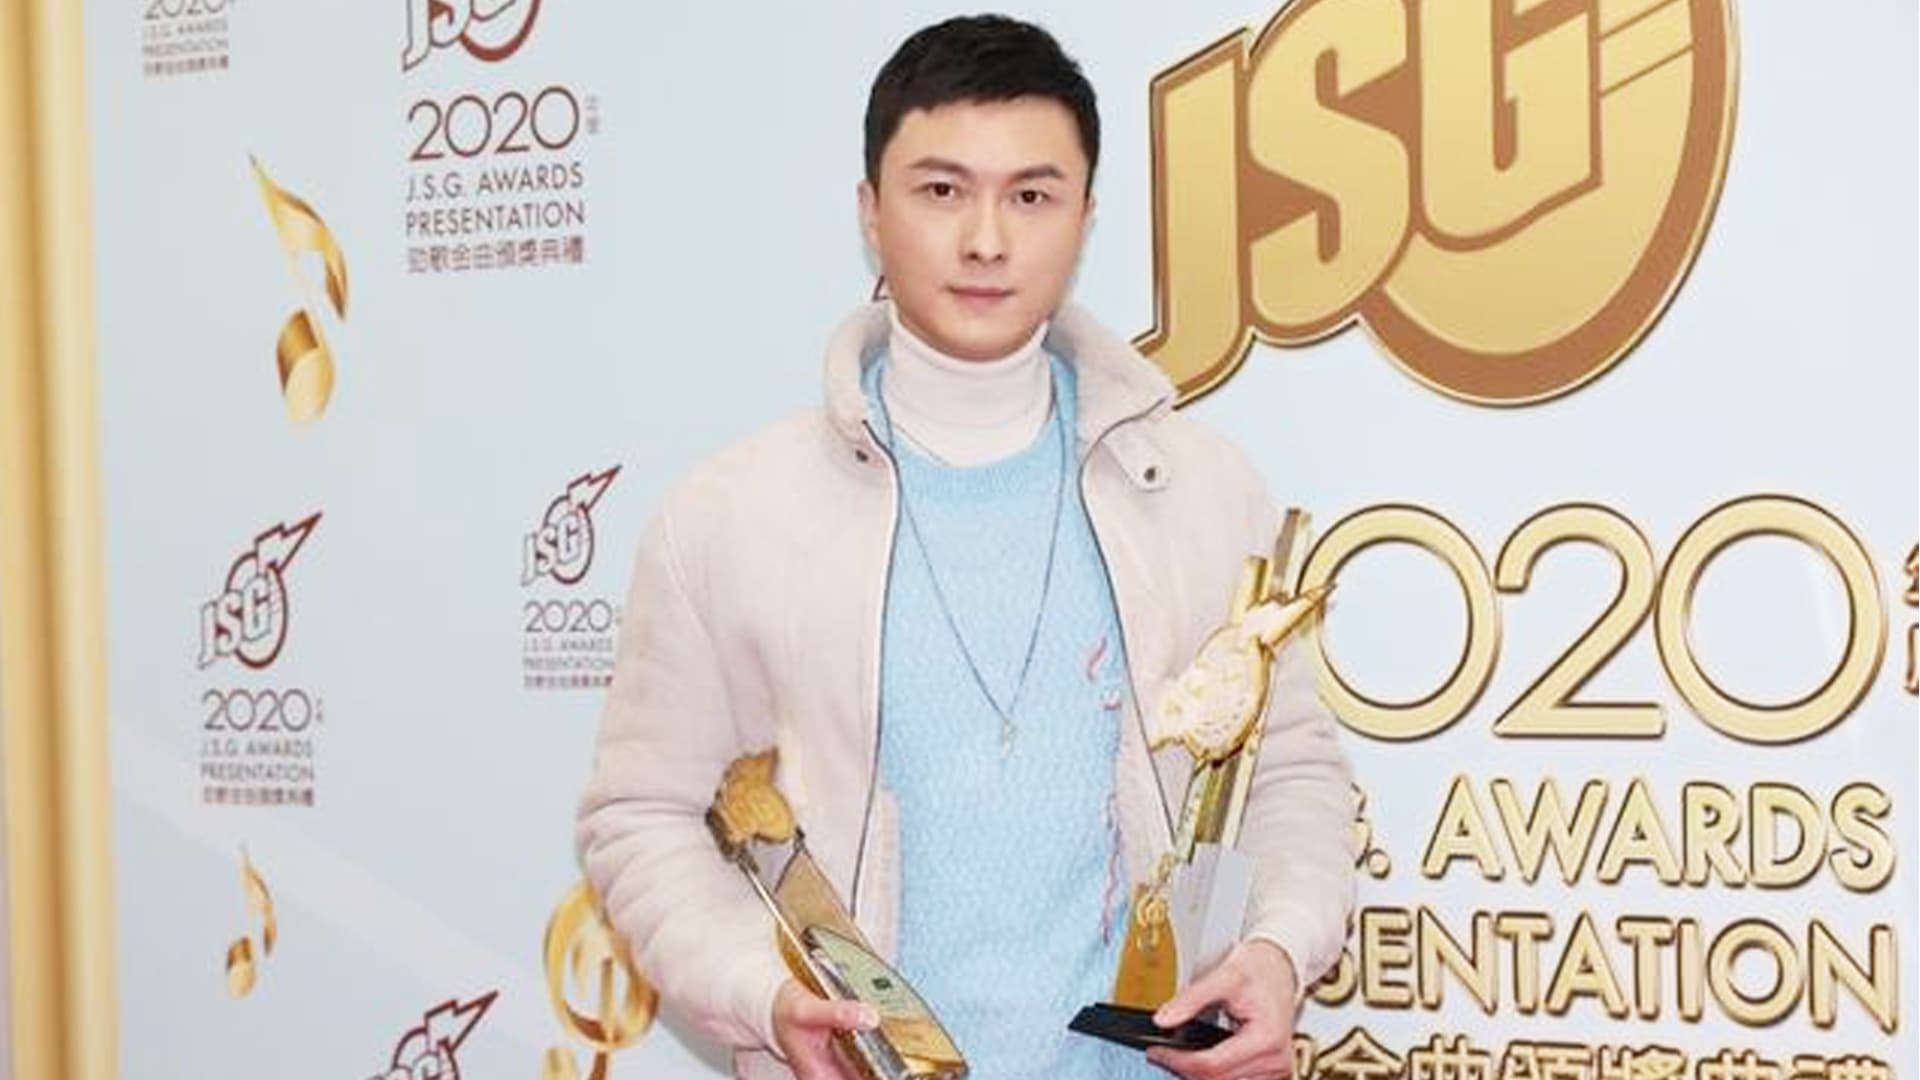 Vincent Wong Wins 2 Music Awards, But Doesn’t Thank Wife Yoyo Chen In His Speech This Time